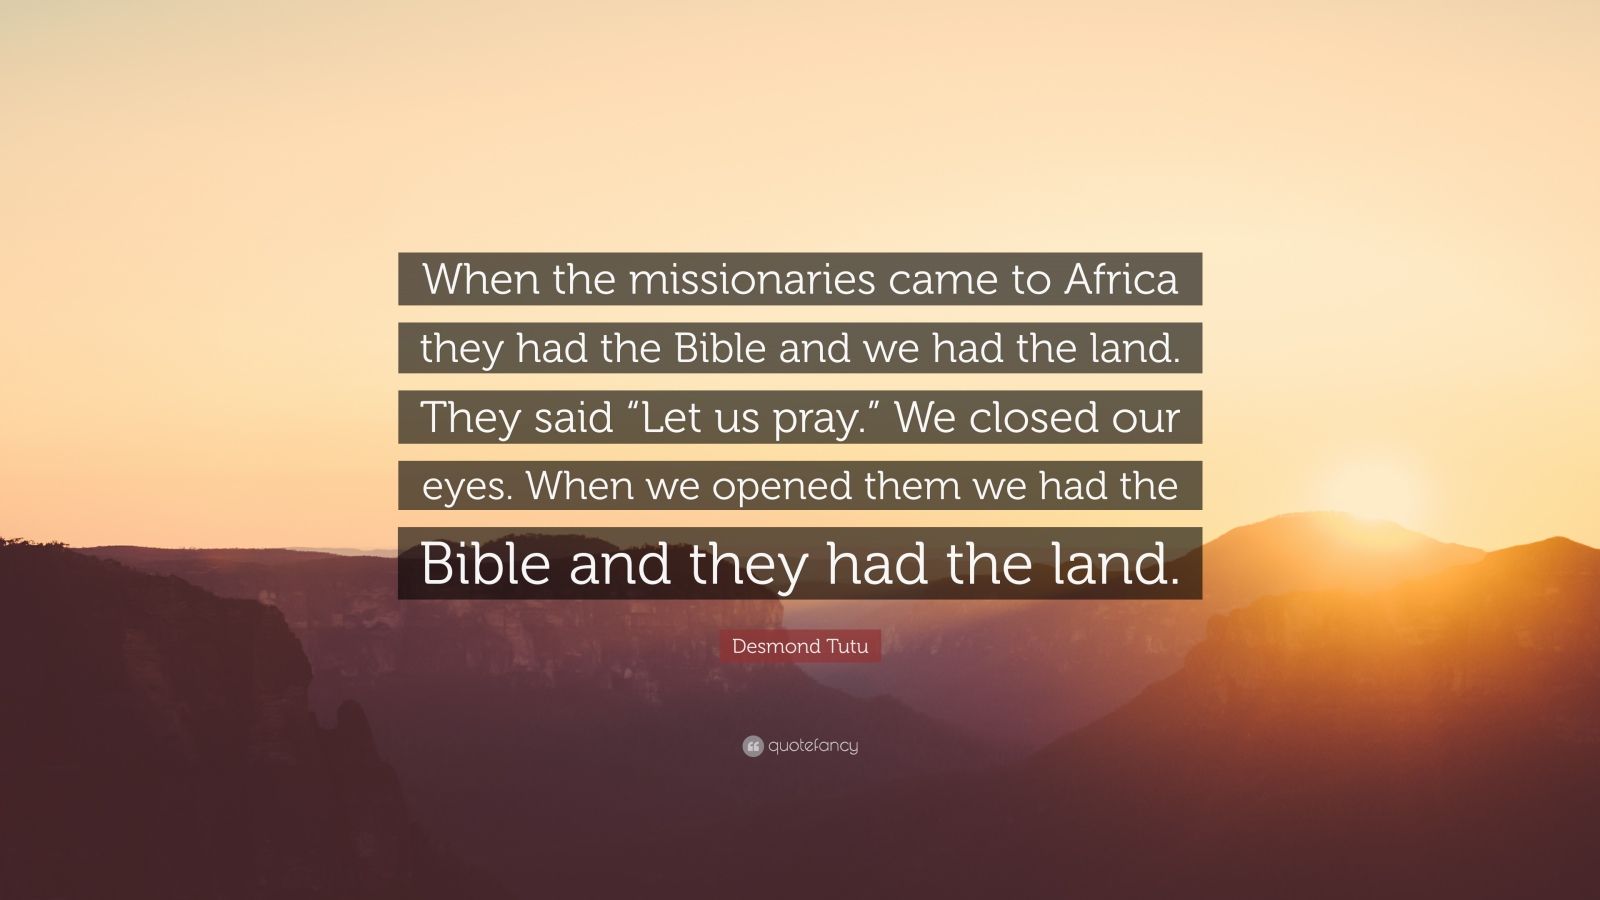 desmond tutu quote: "when the missionaries came to africa they